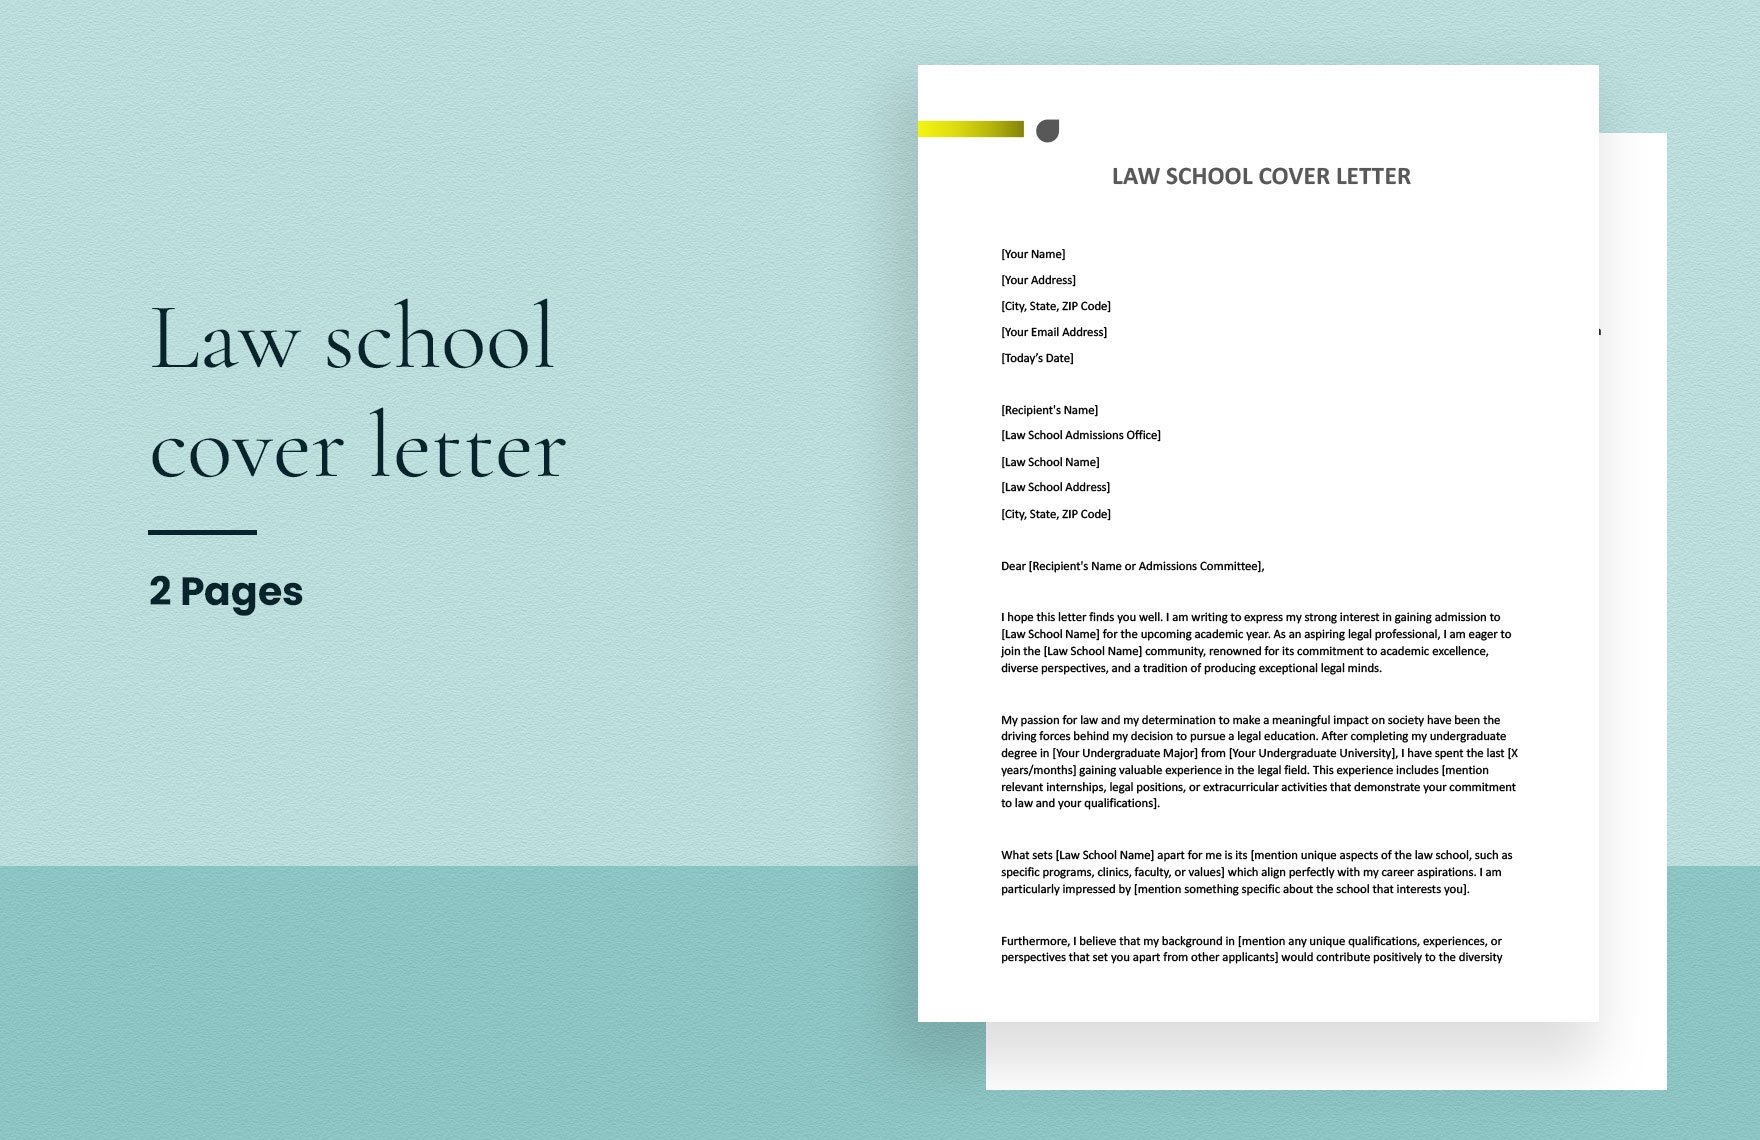 Law school cover letter in Word, Google Docs